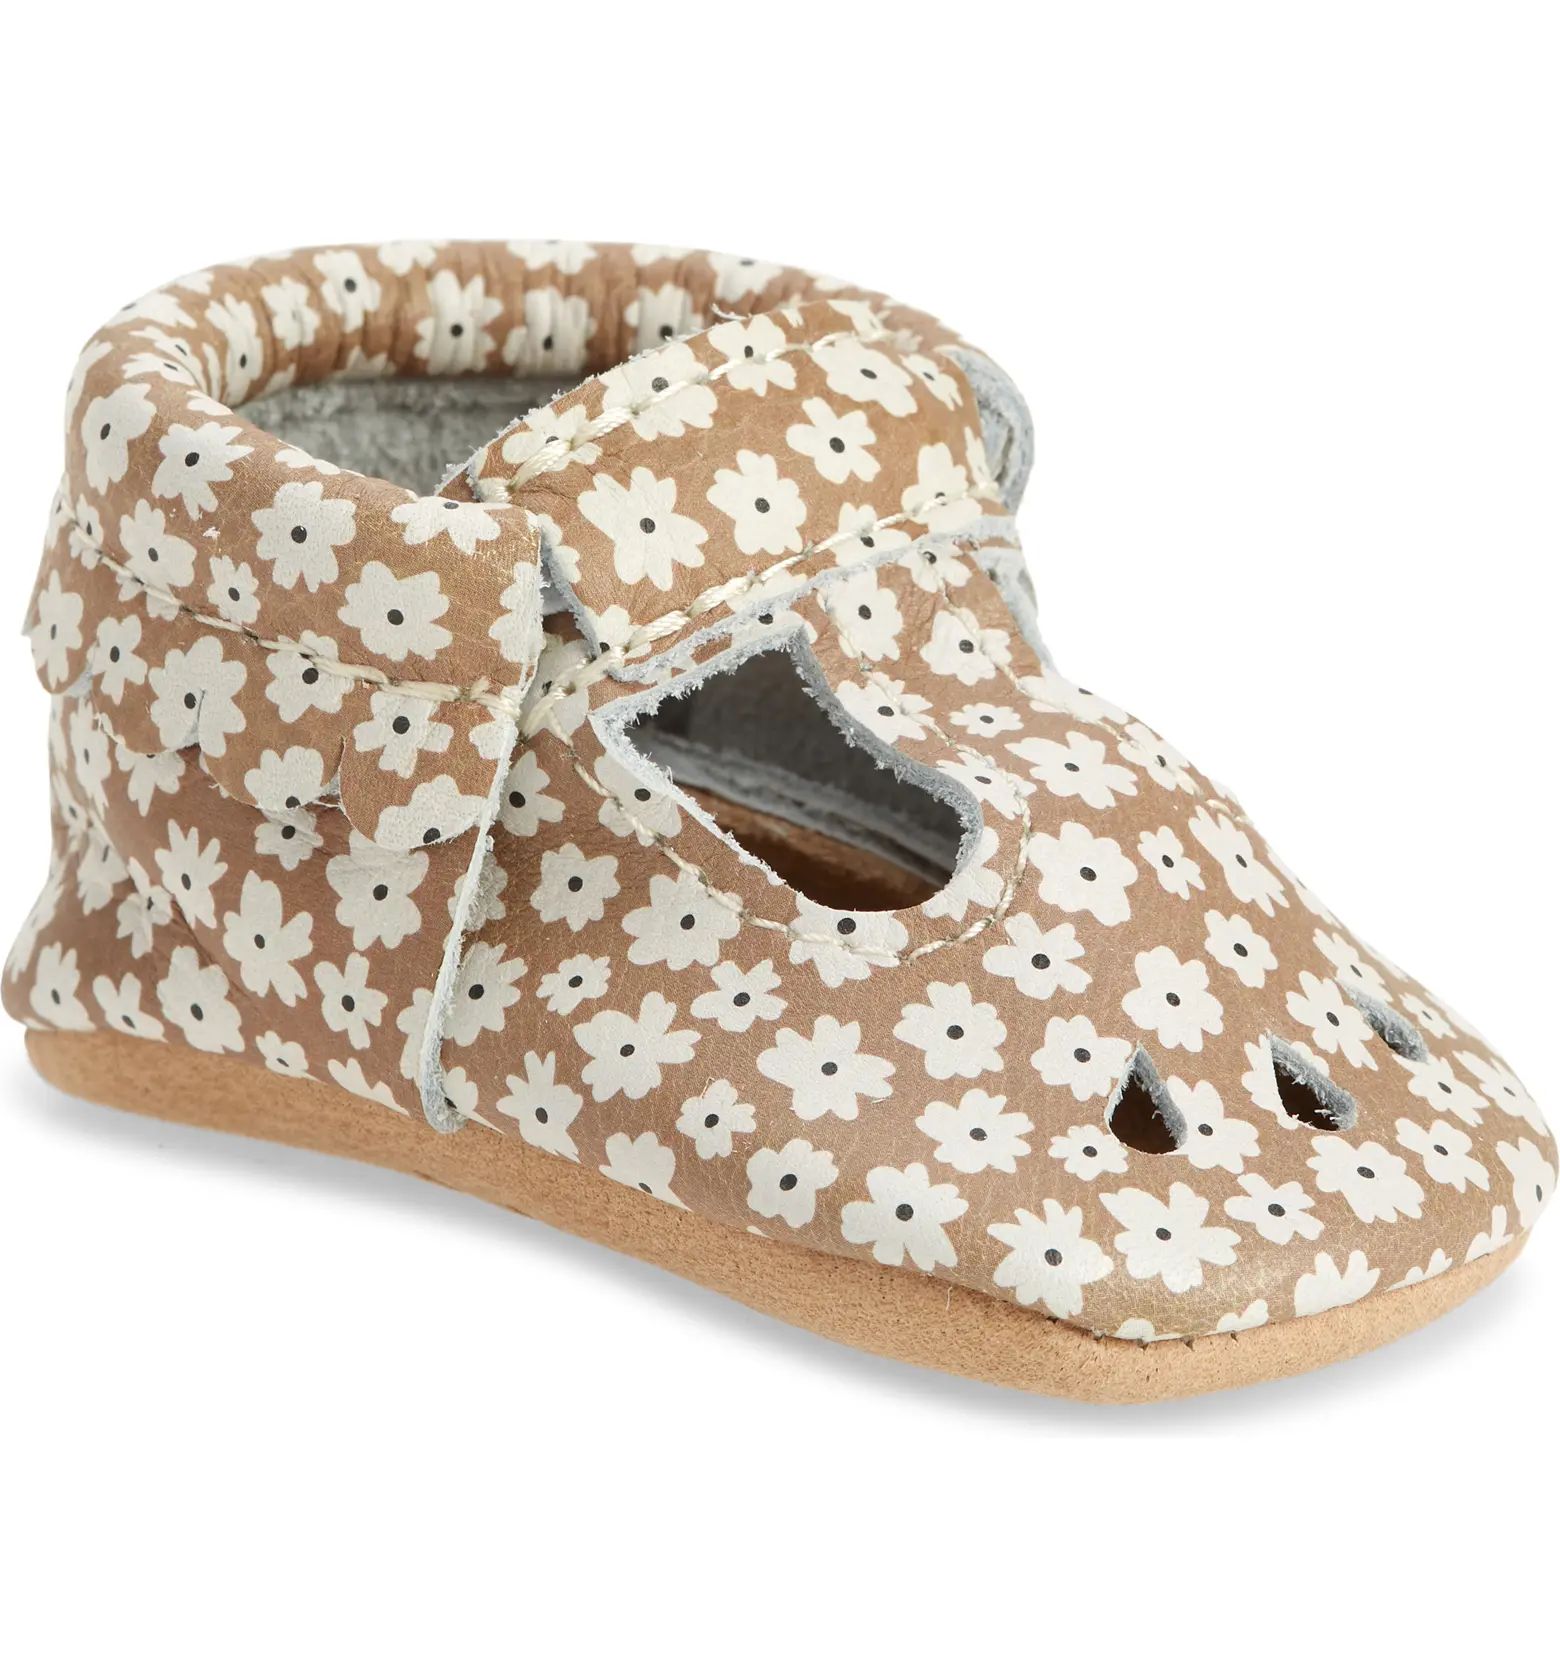 Mary Jane Moccasin | Nordstrom